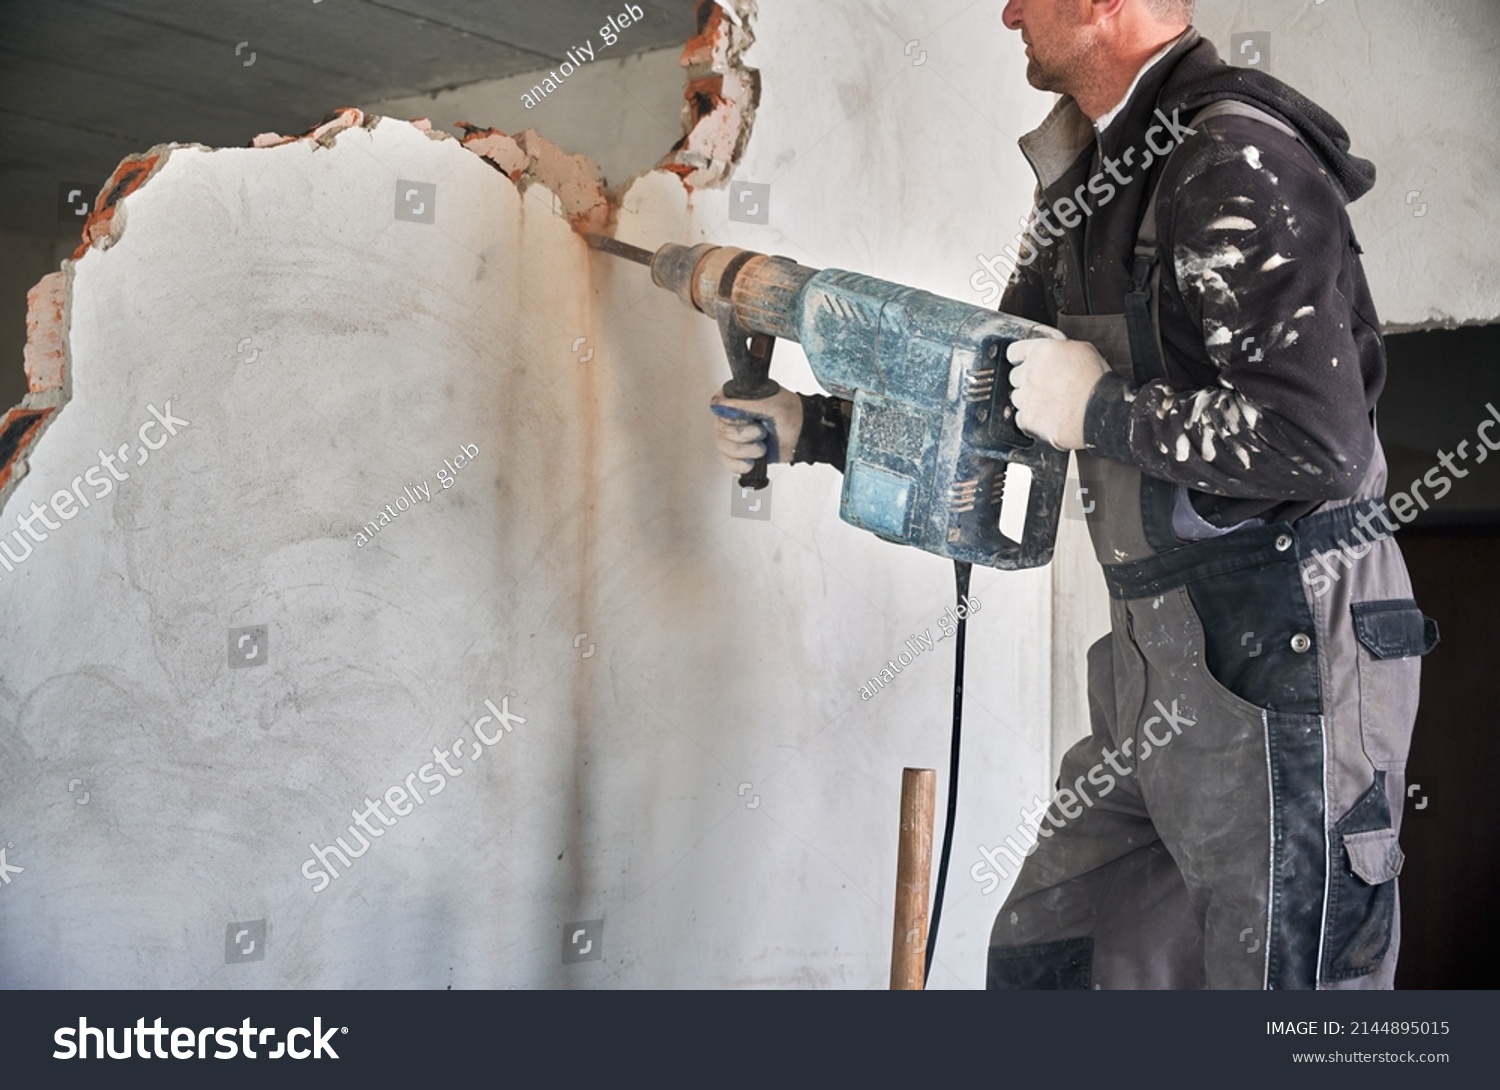 Close up of special powerful hand instrument with percussion mechanism for drilling and breaking walls. Man holding jackhammer and dismantling inner wall in room. #2144895015